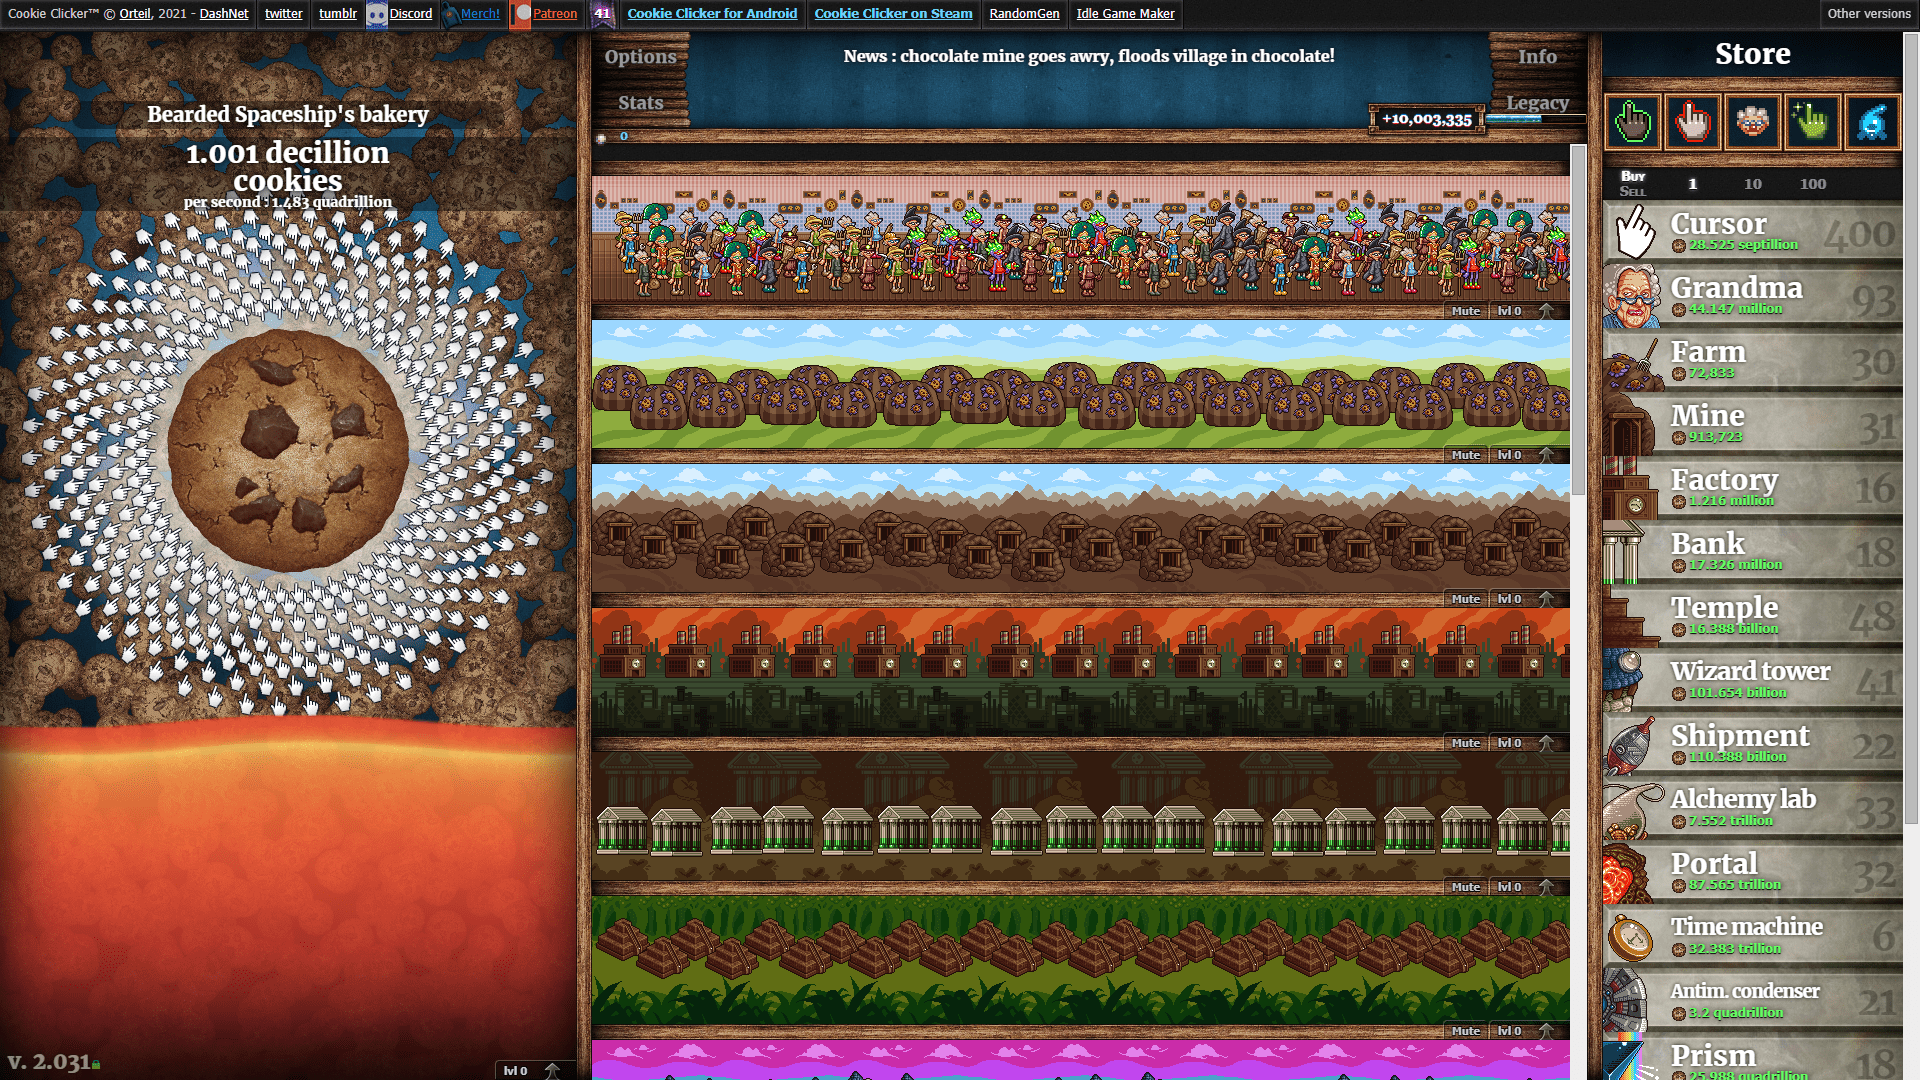 Download Cookie Clickers 2 App for PC / Windows / Computer